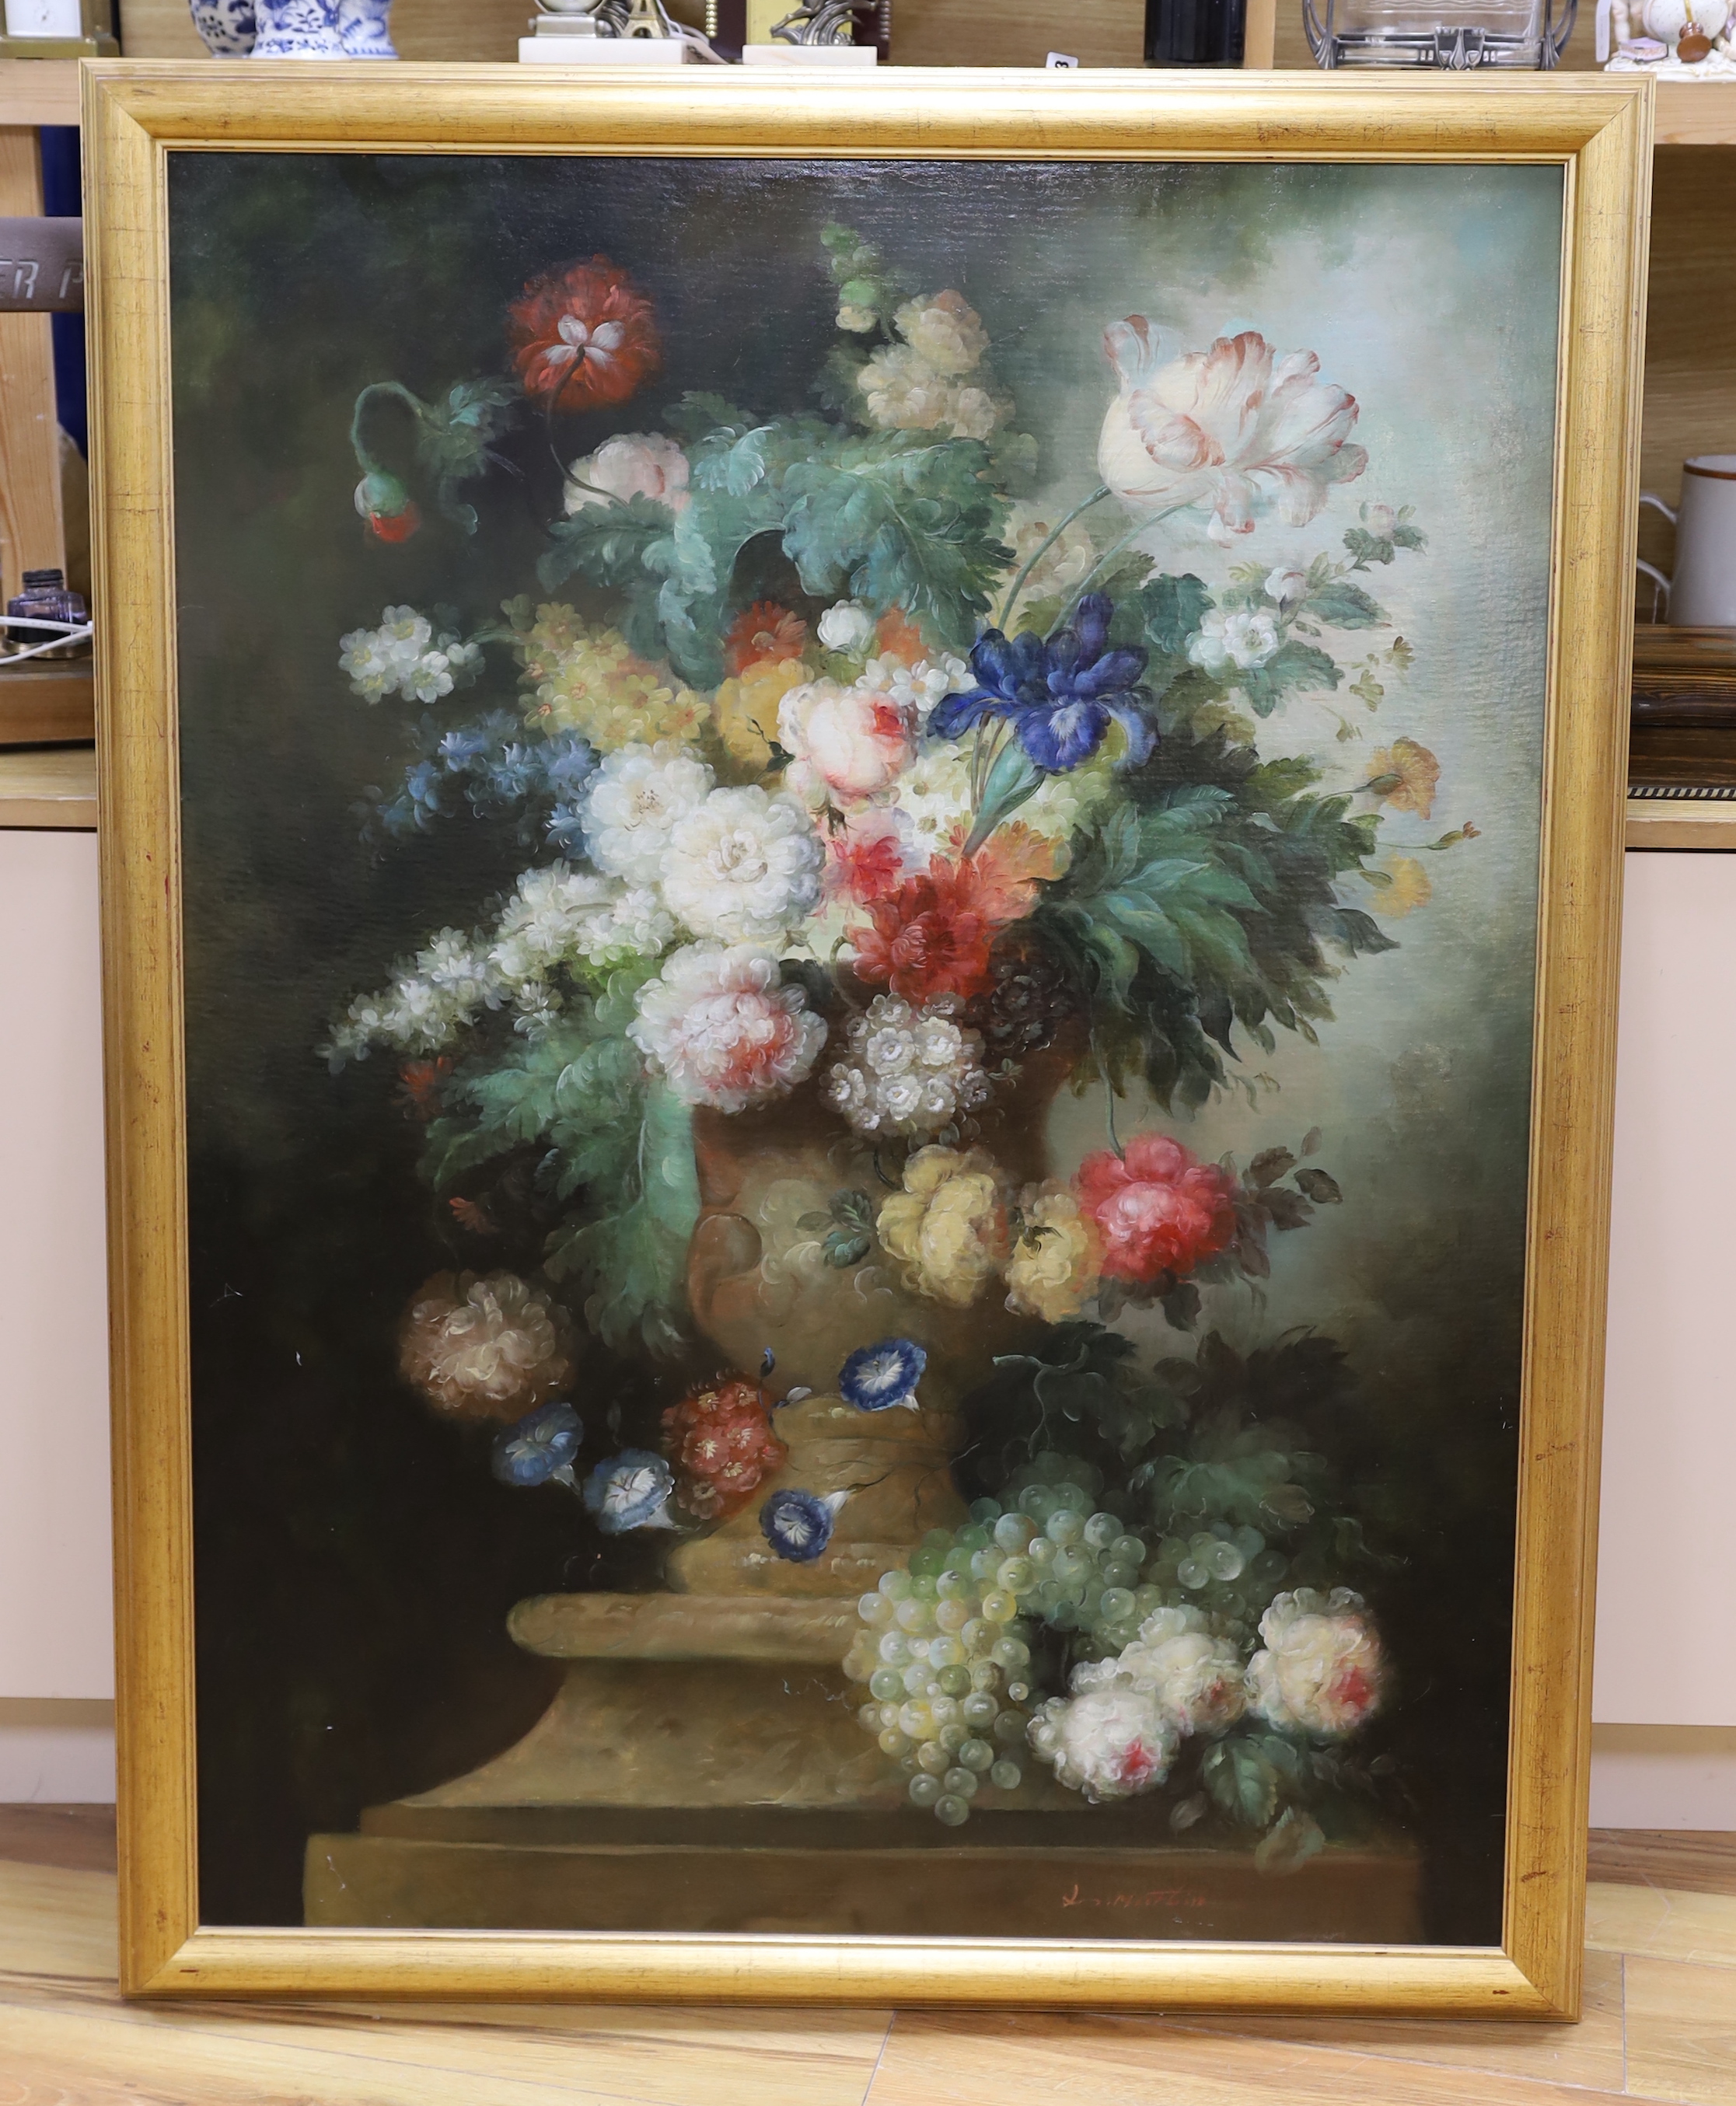 After the 17th century Dutch style, oil on canvas, Still life, vase of flowers and grapes in a vase and on a ledge, indistinctly signed, 120 x 89cm